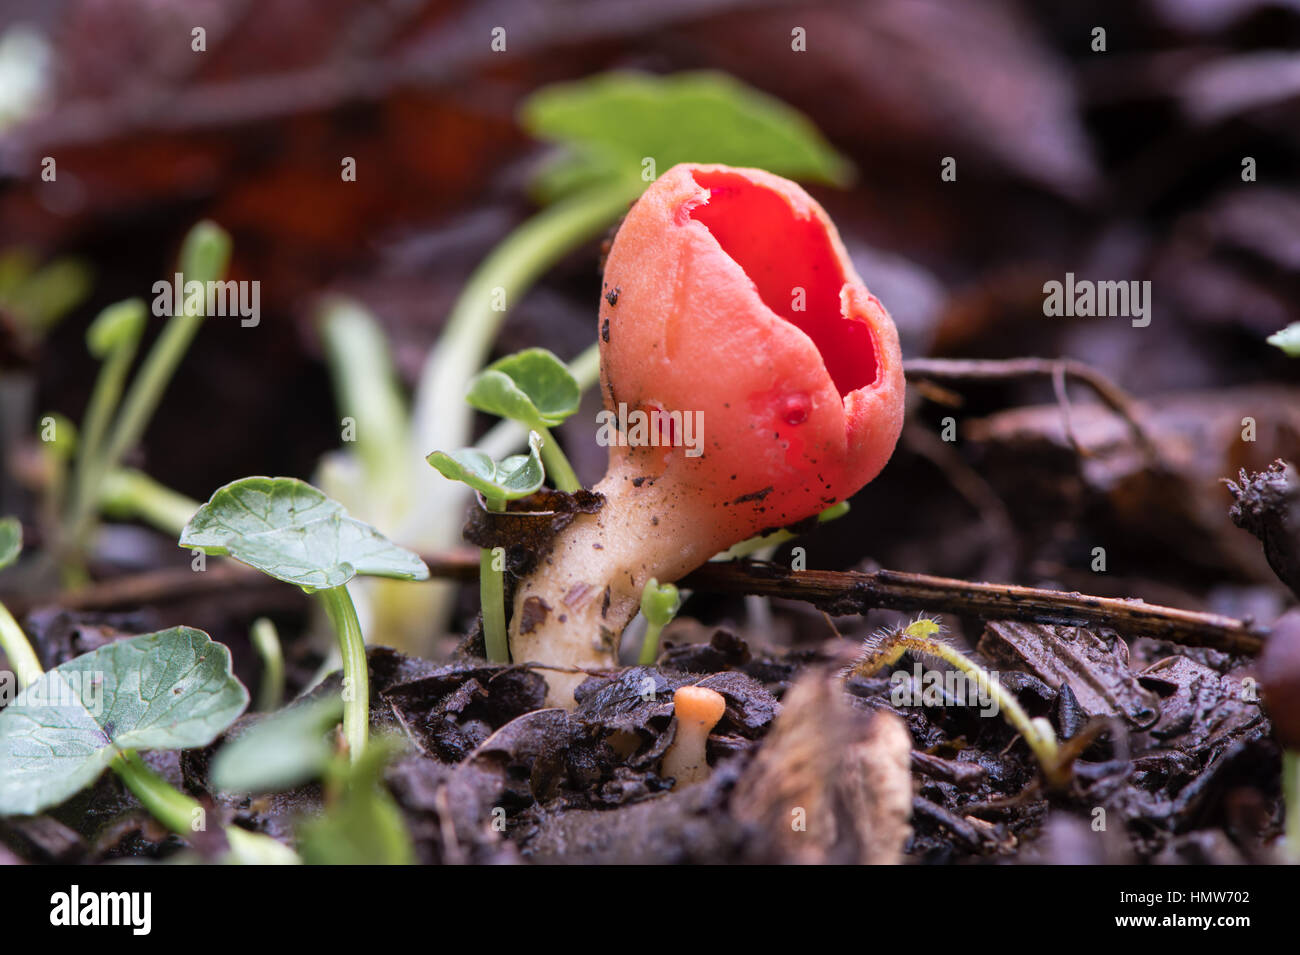 Scarlet elfcup fungus (Sarcoscypha austriaca). Red fungus in family Sarcoscyphaceae, with small immature fruiting body emerging through leaf litter Stock Photo